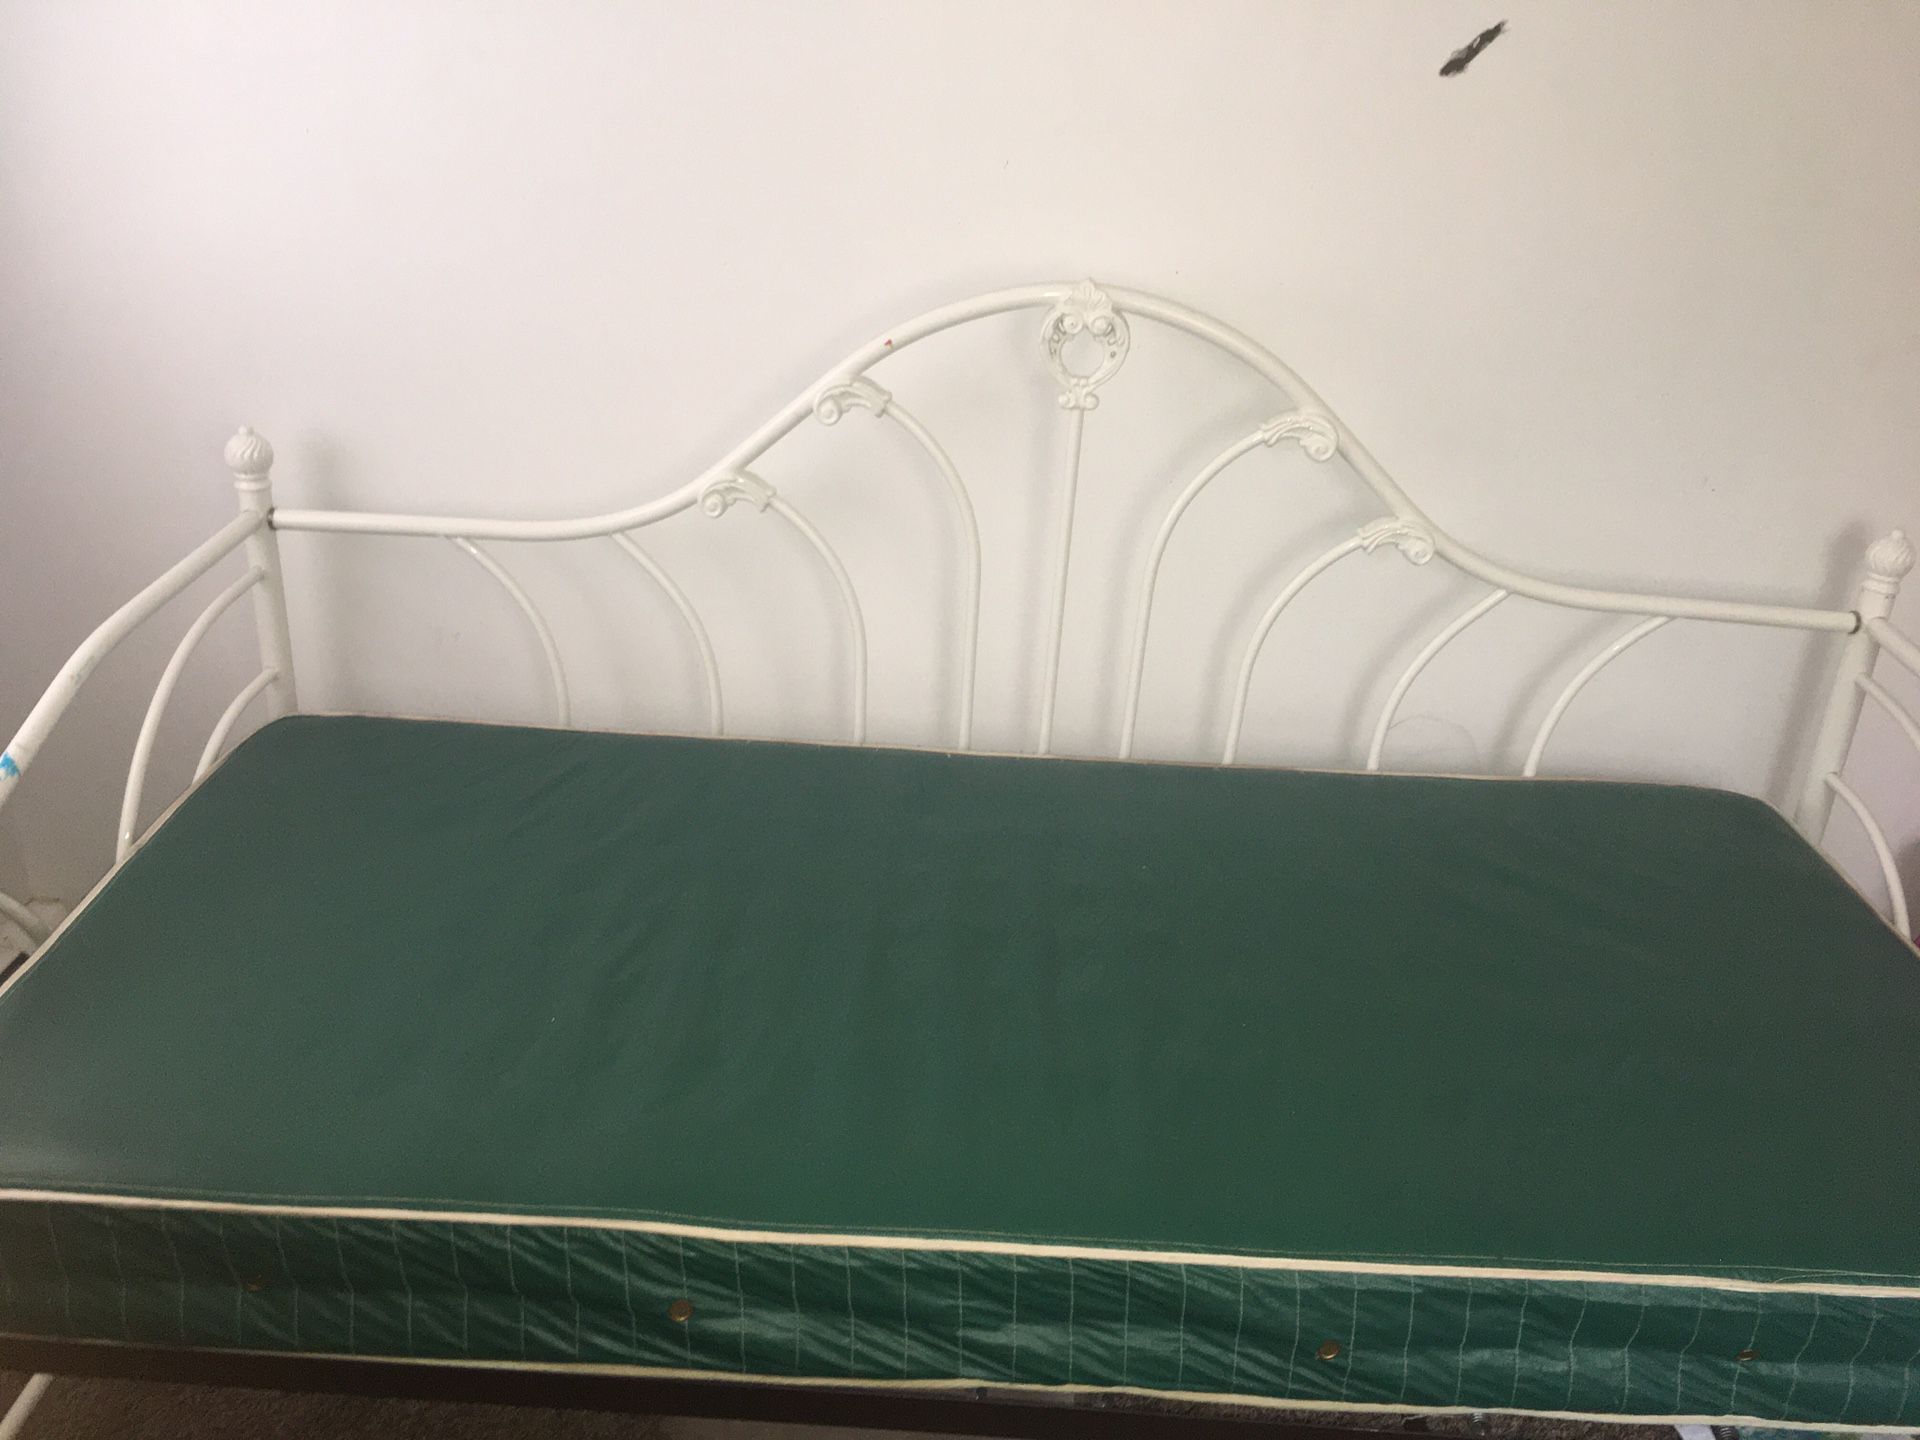 Waterproof bed with bed frame